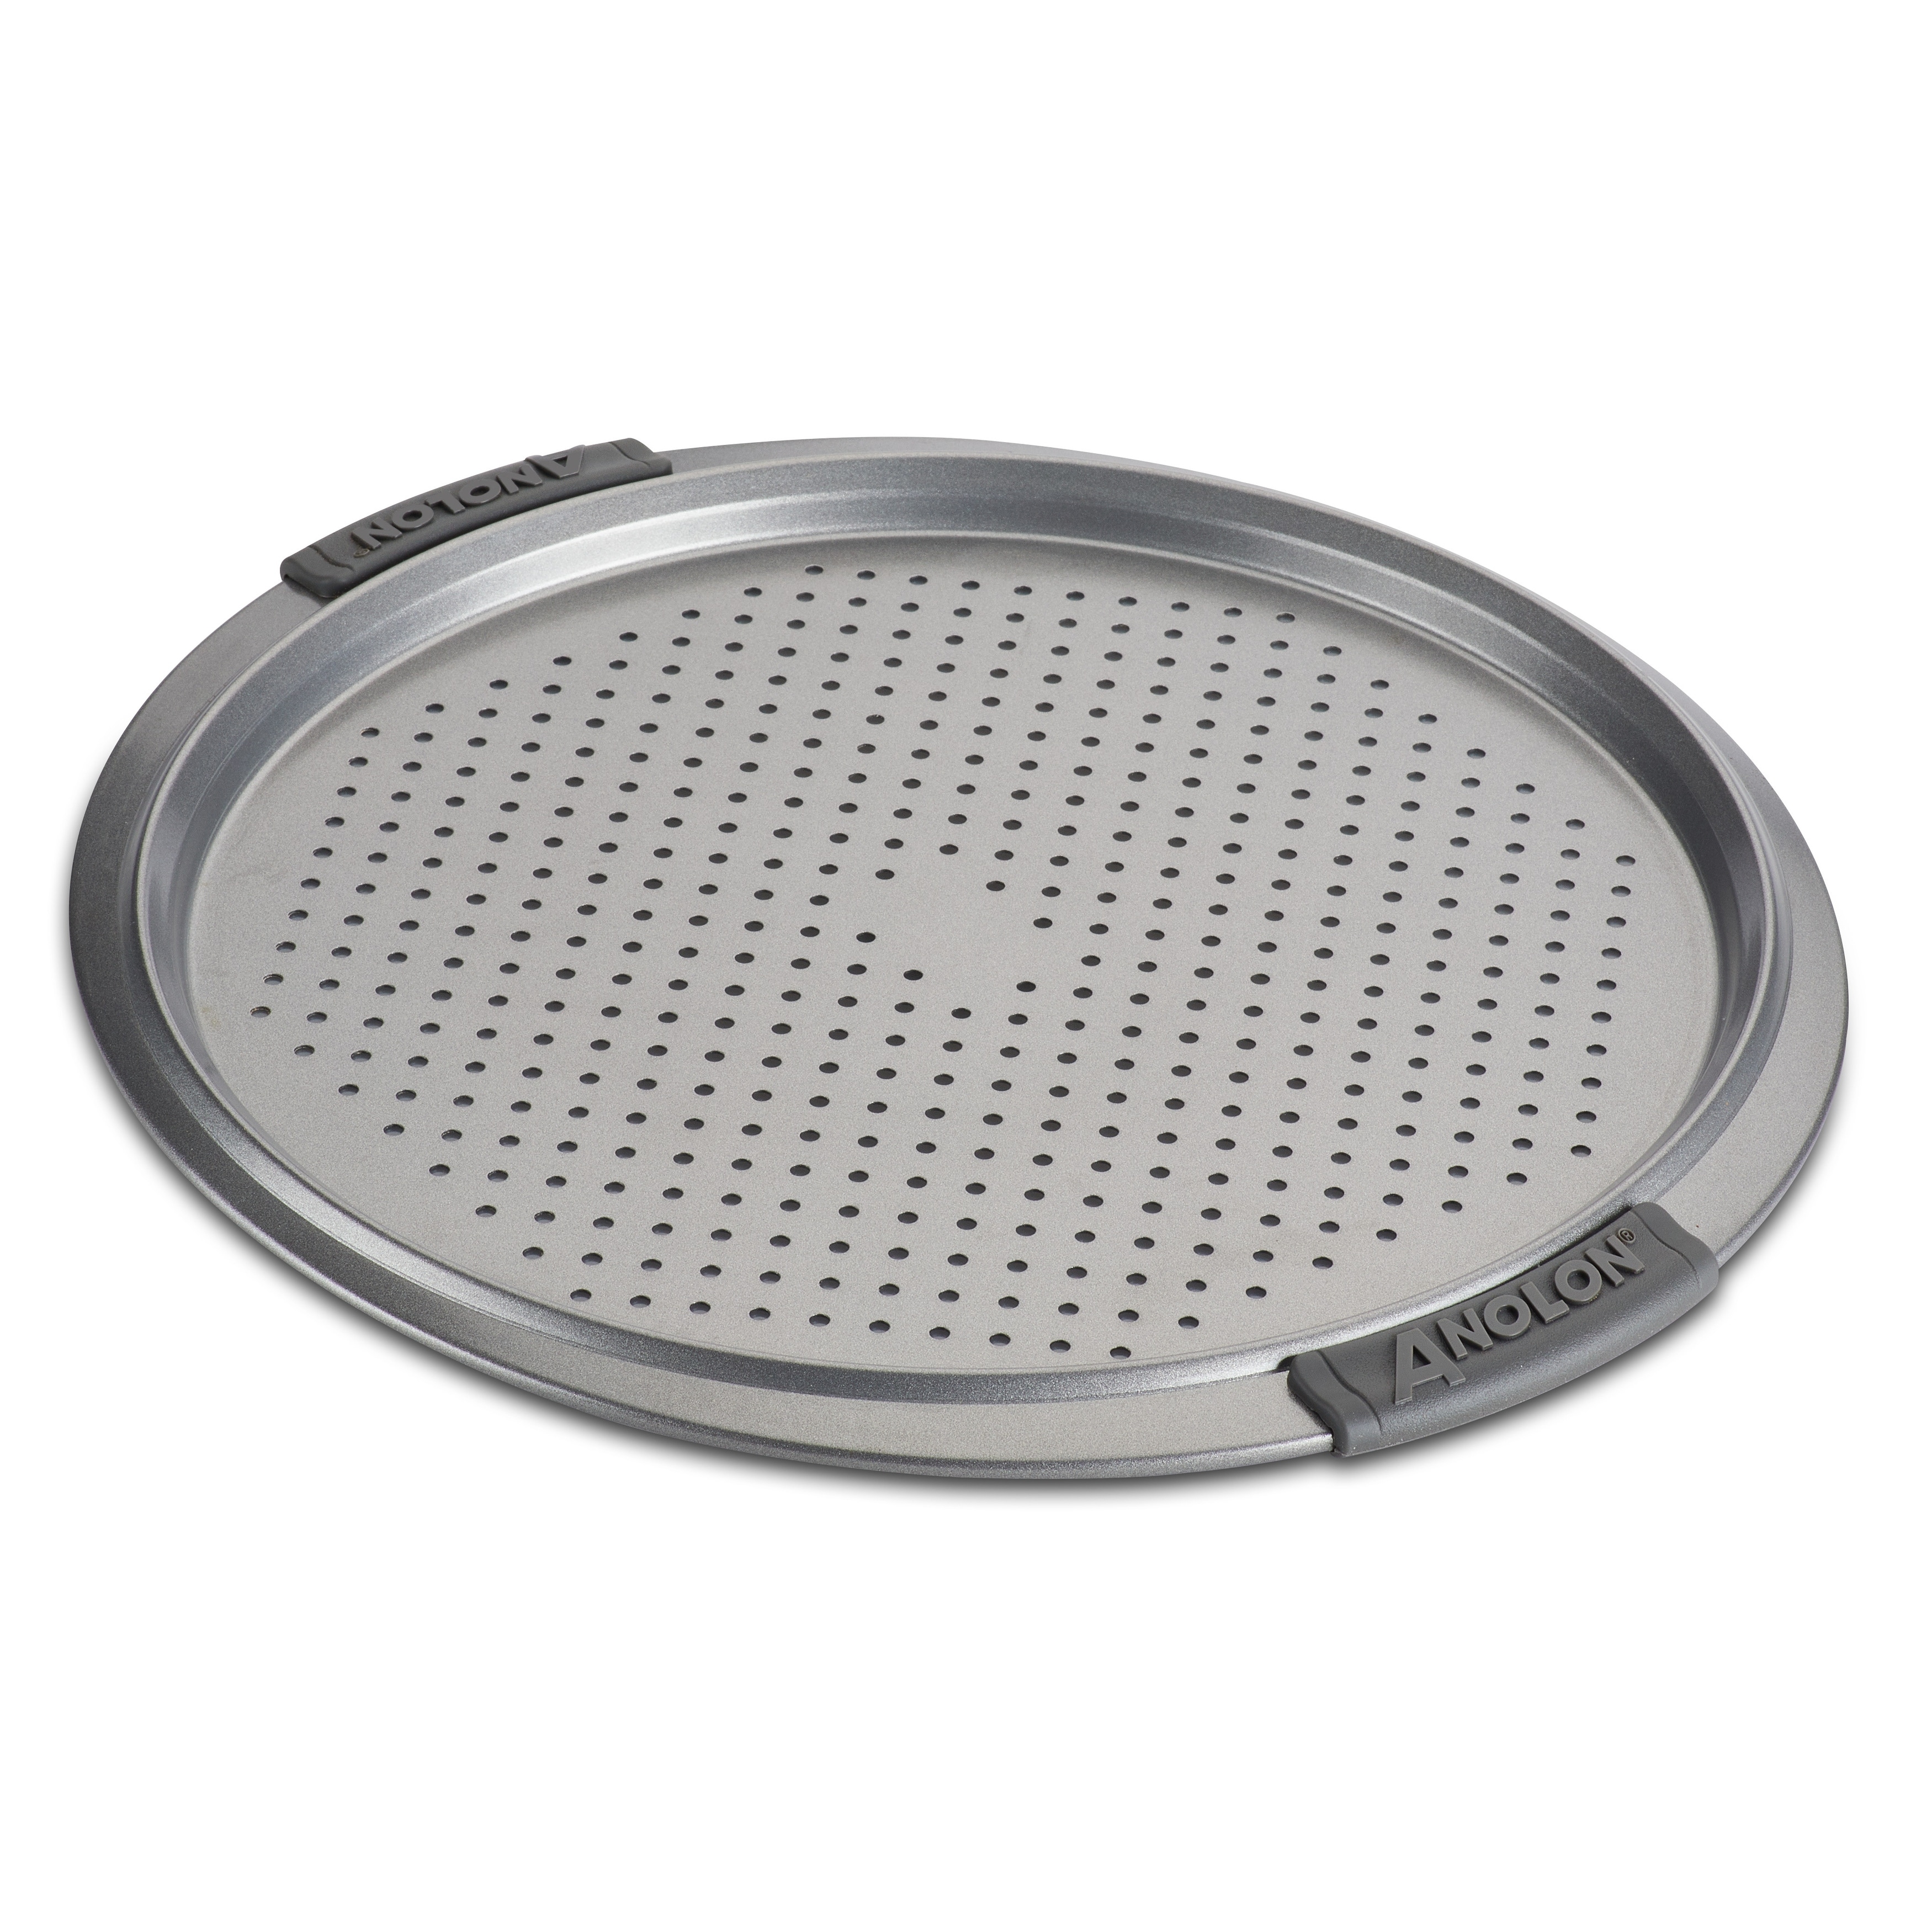 https://ak1.ostkcdn.com/images/products/is/images/direct/2f0c9c84648cfa622330ad899bdfacce1586e8ab/Anolon-Advanced-Nonstick-Bakeware-Round-Perforated-Pizza-Pan%2C-13-Inch%2C-Gray.jpg